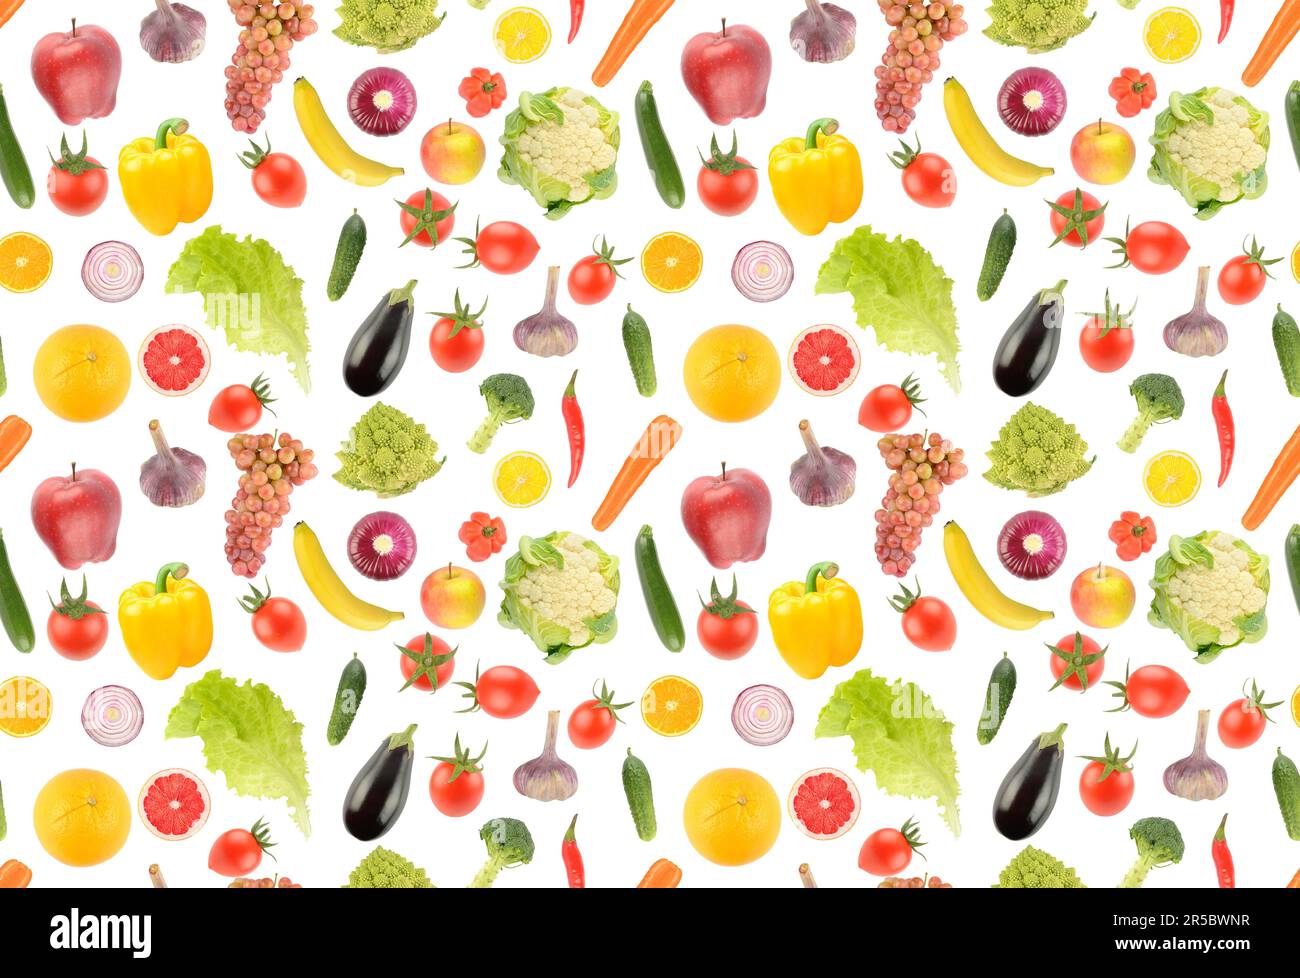 Large seamless pattern of fresh fruits and vegetables isolated on white background. Stock Photo